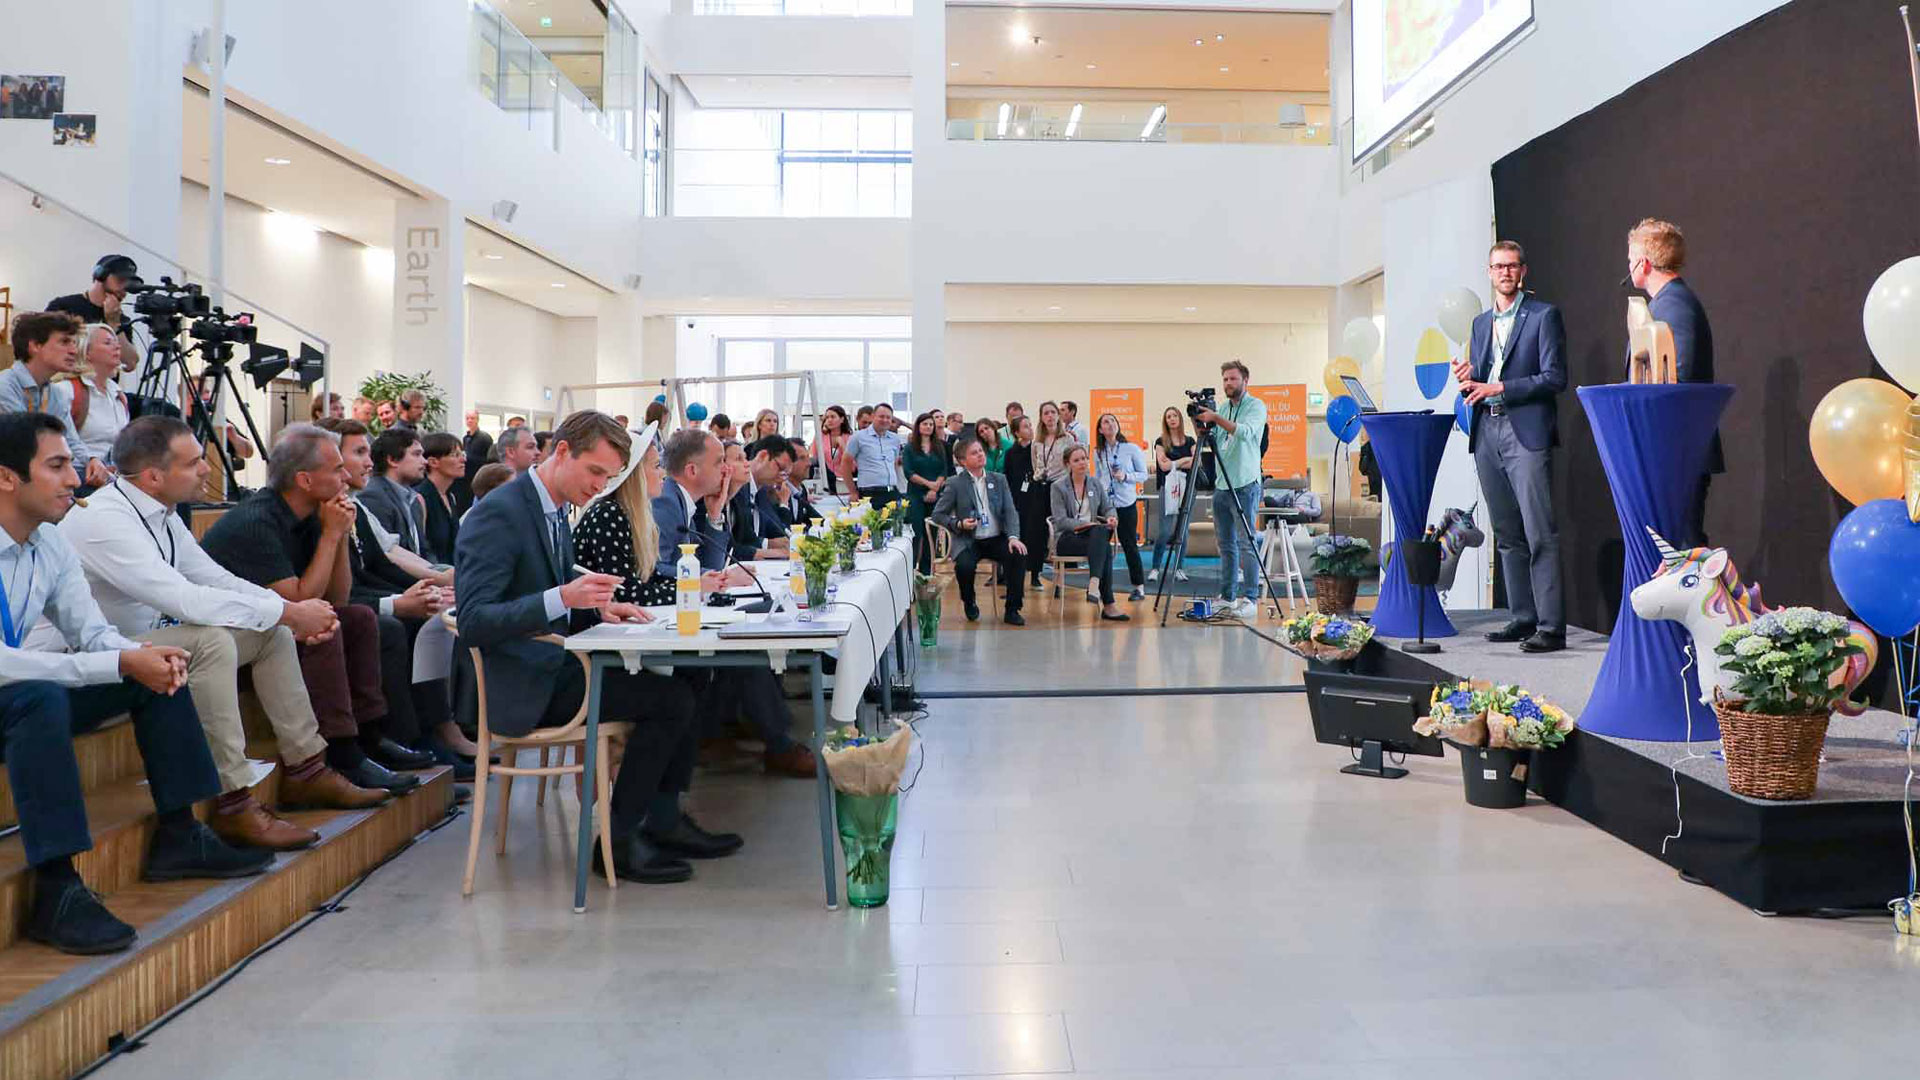 Audience, finalists and jury at Vattenfall Innovation ceremony